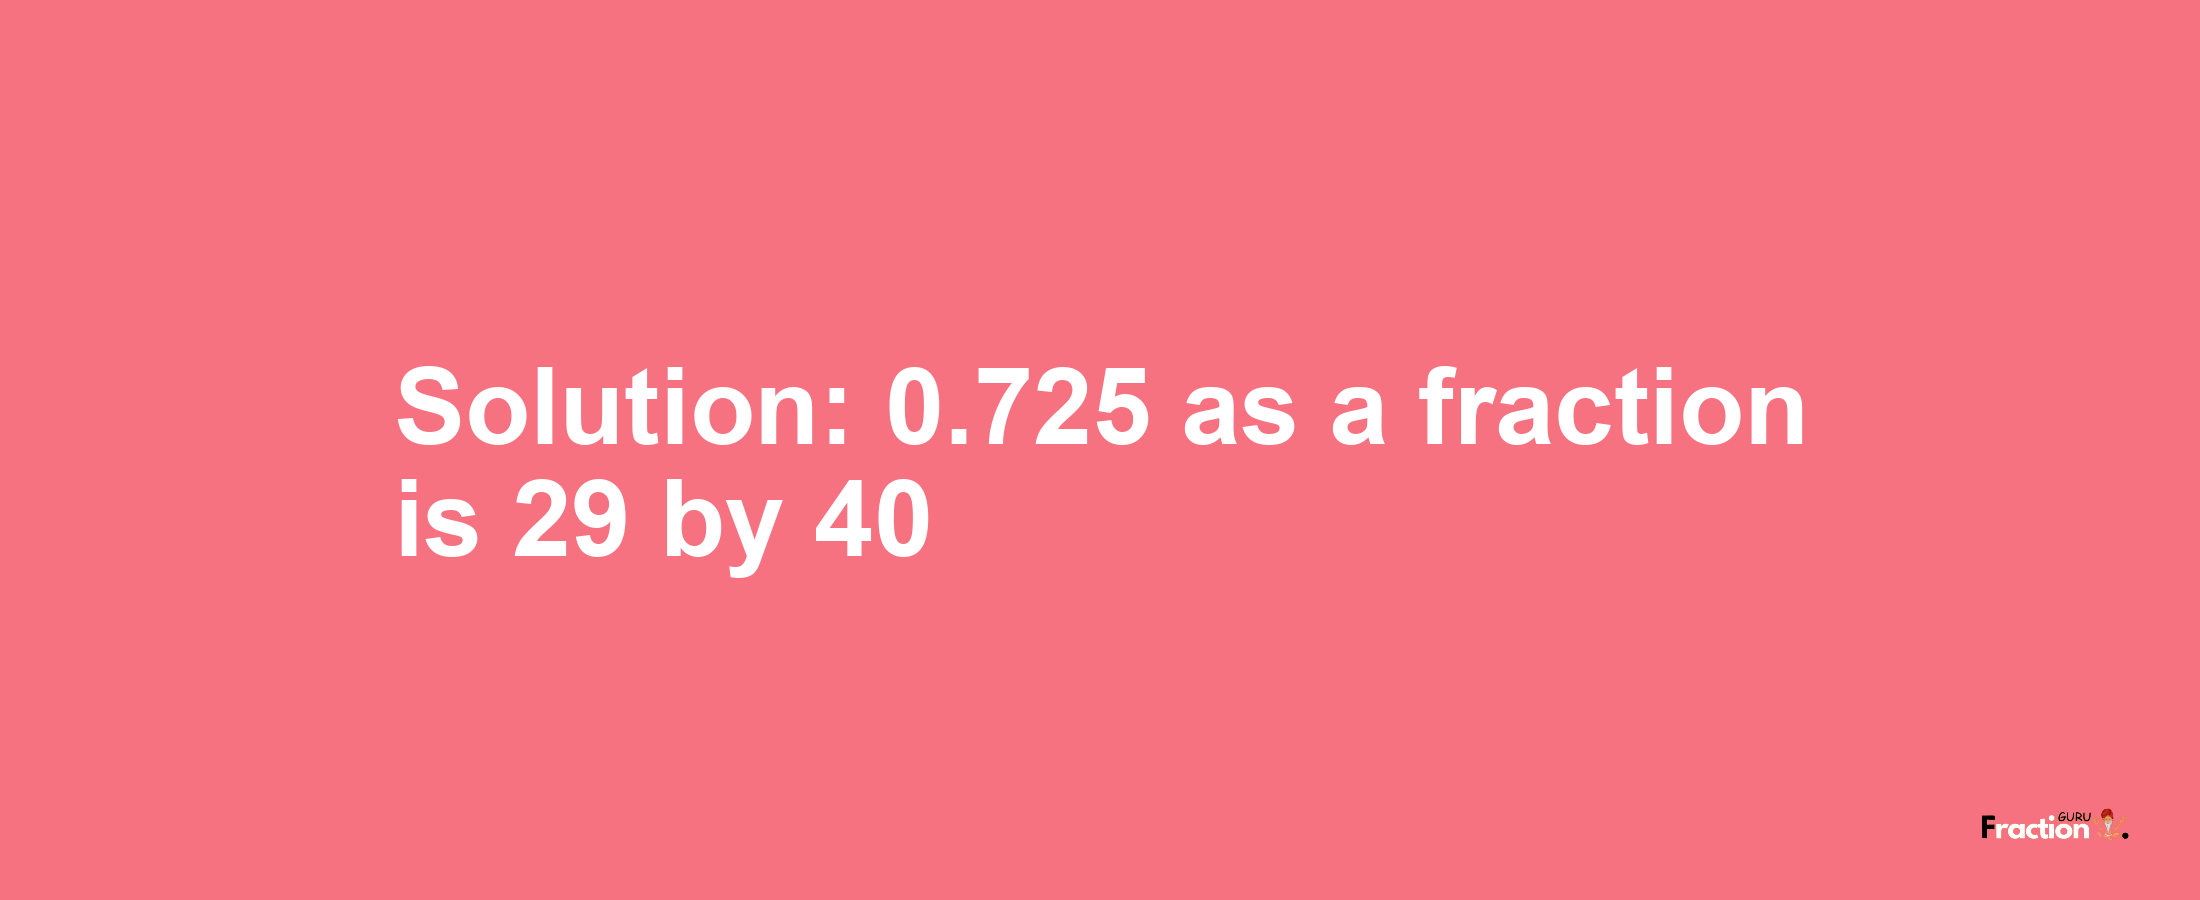 Solution:0.725 as a fraction is 29/40